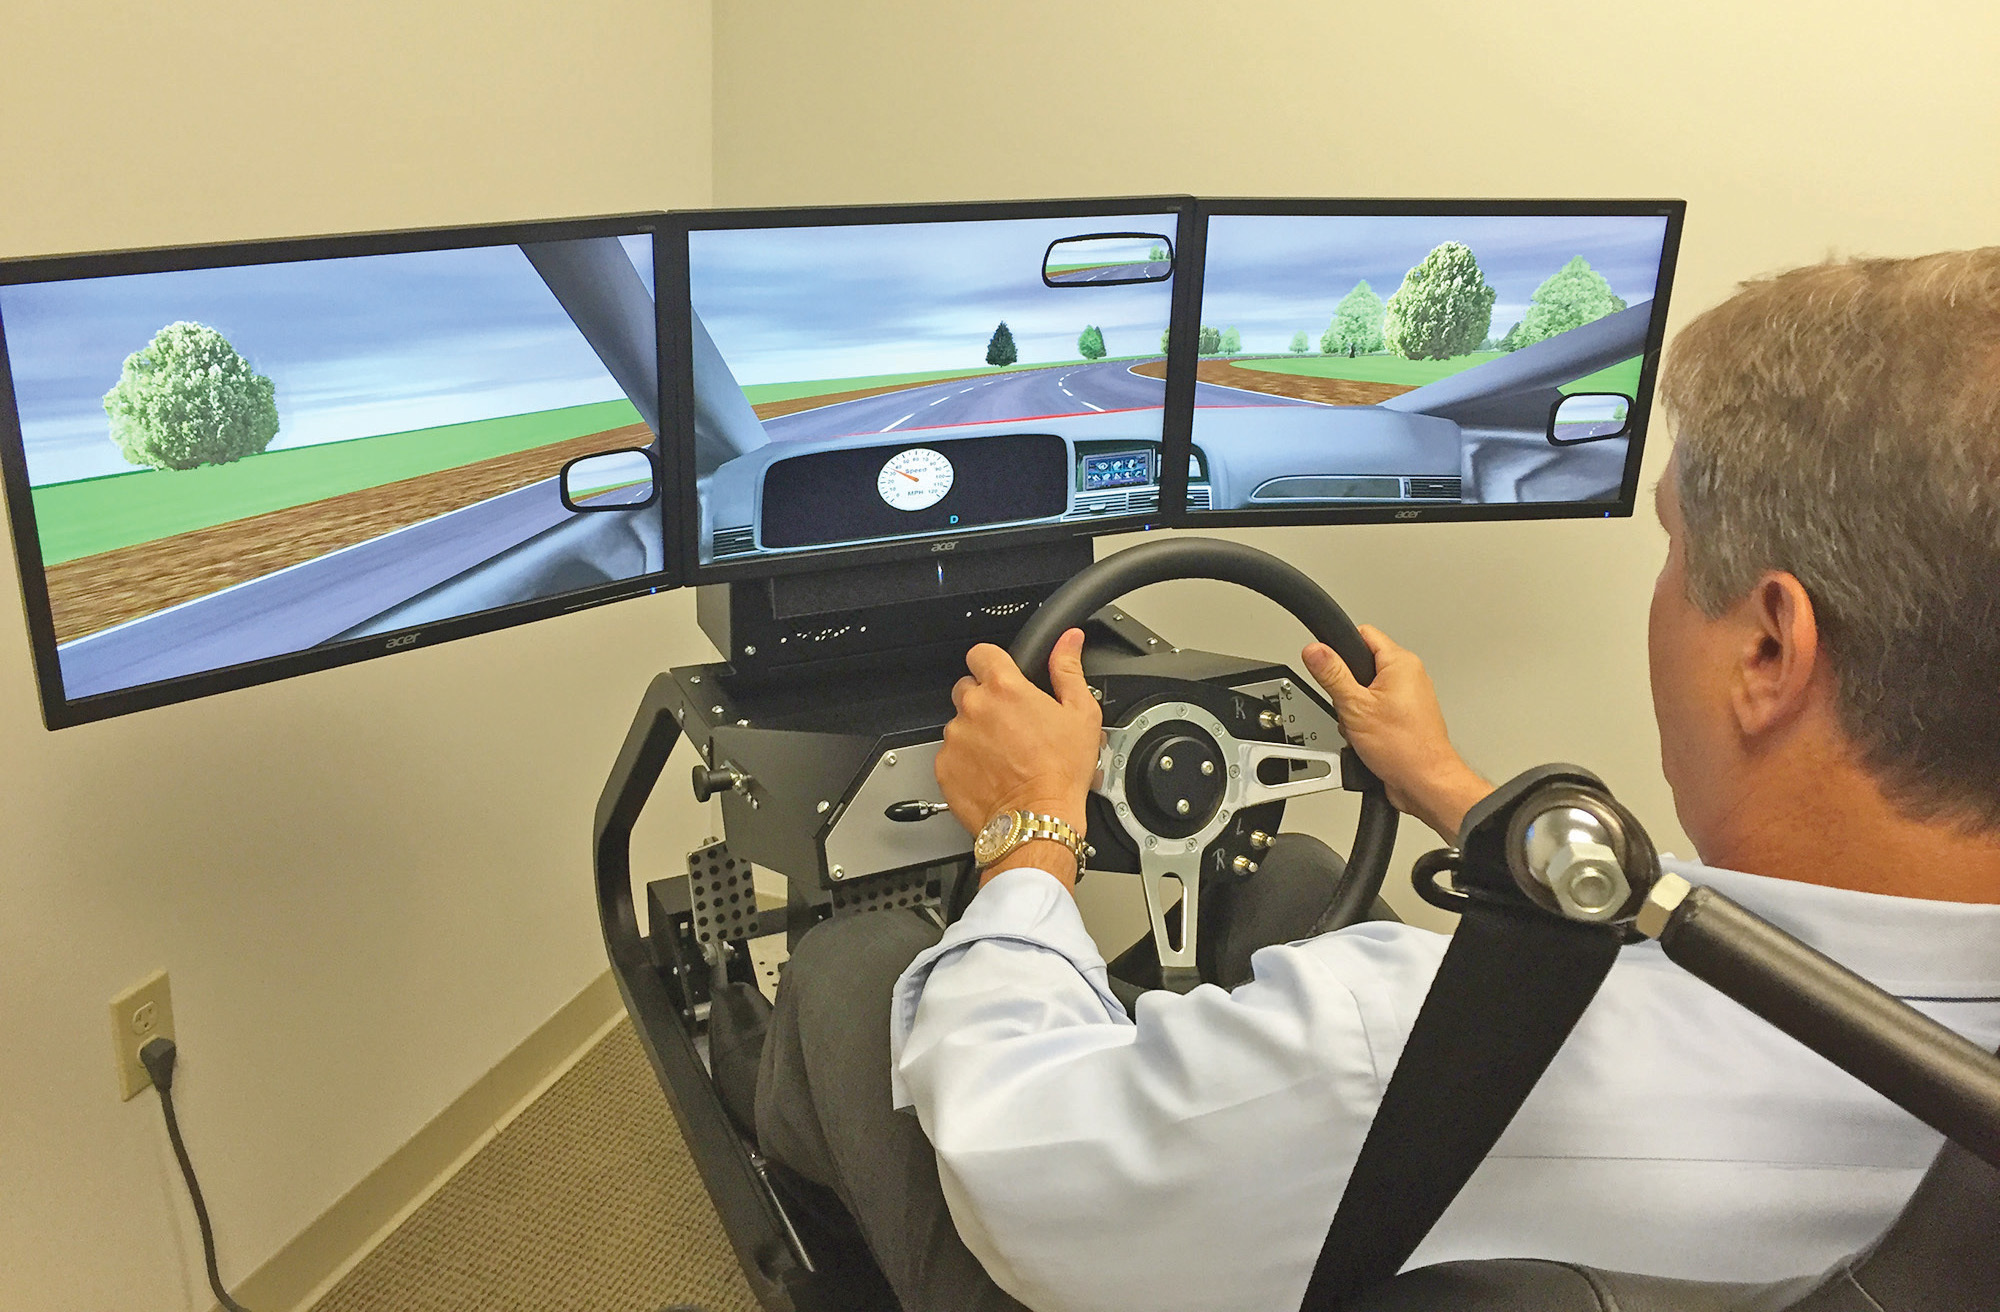 Designed to be more like a flight training simulator than a video game, the Apex Virtual Vehicle allows students to experience realistic driving situations.